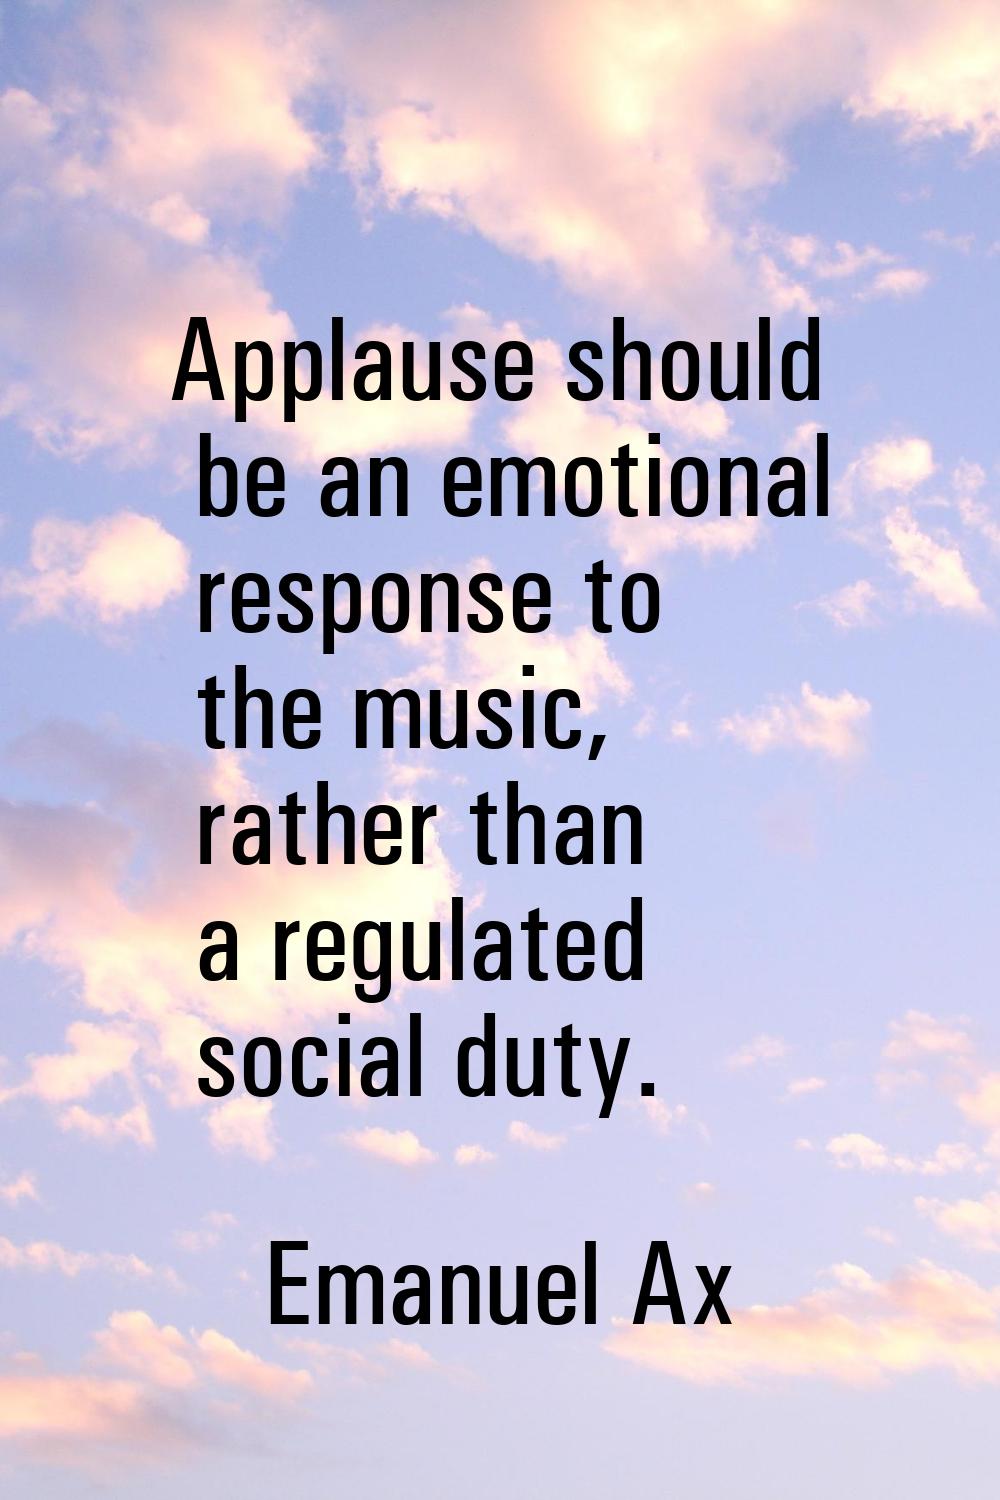 Applause should be an emotional response to the music, rather than a regulated social duty.